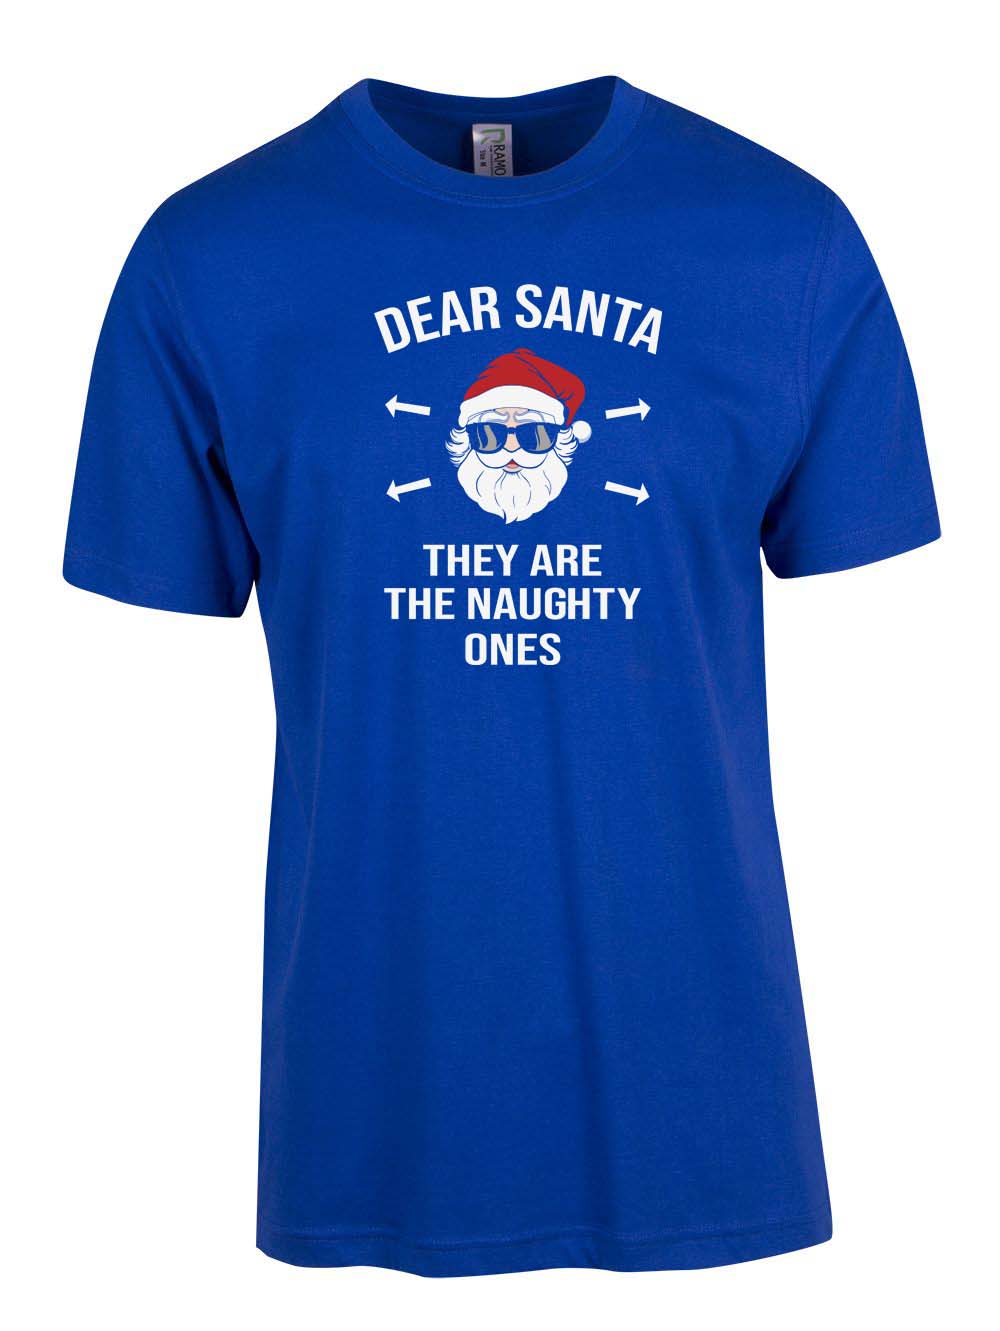 Dear Santa They Are the Naughty Ones Christmas T Shirt